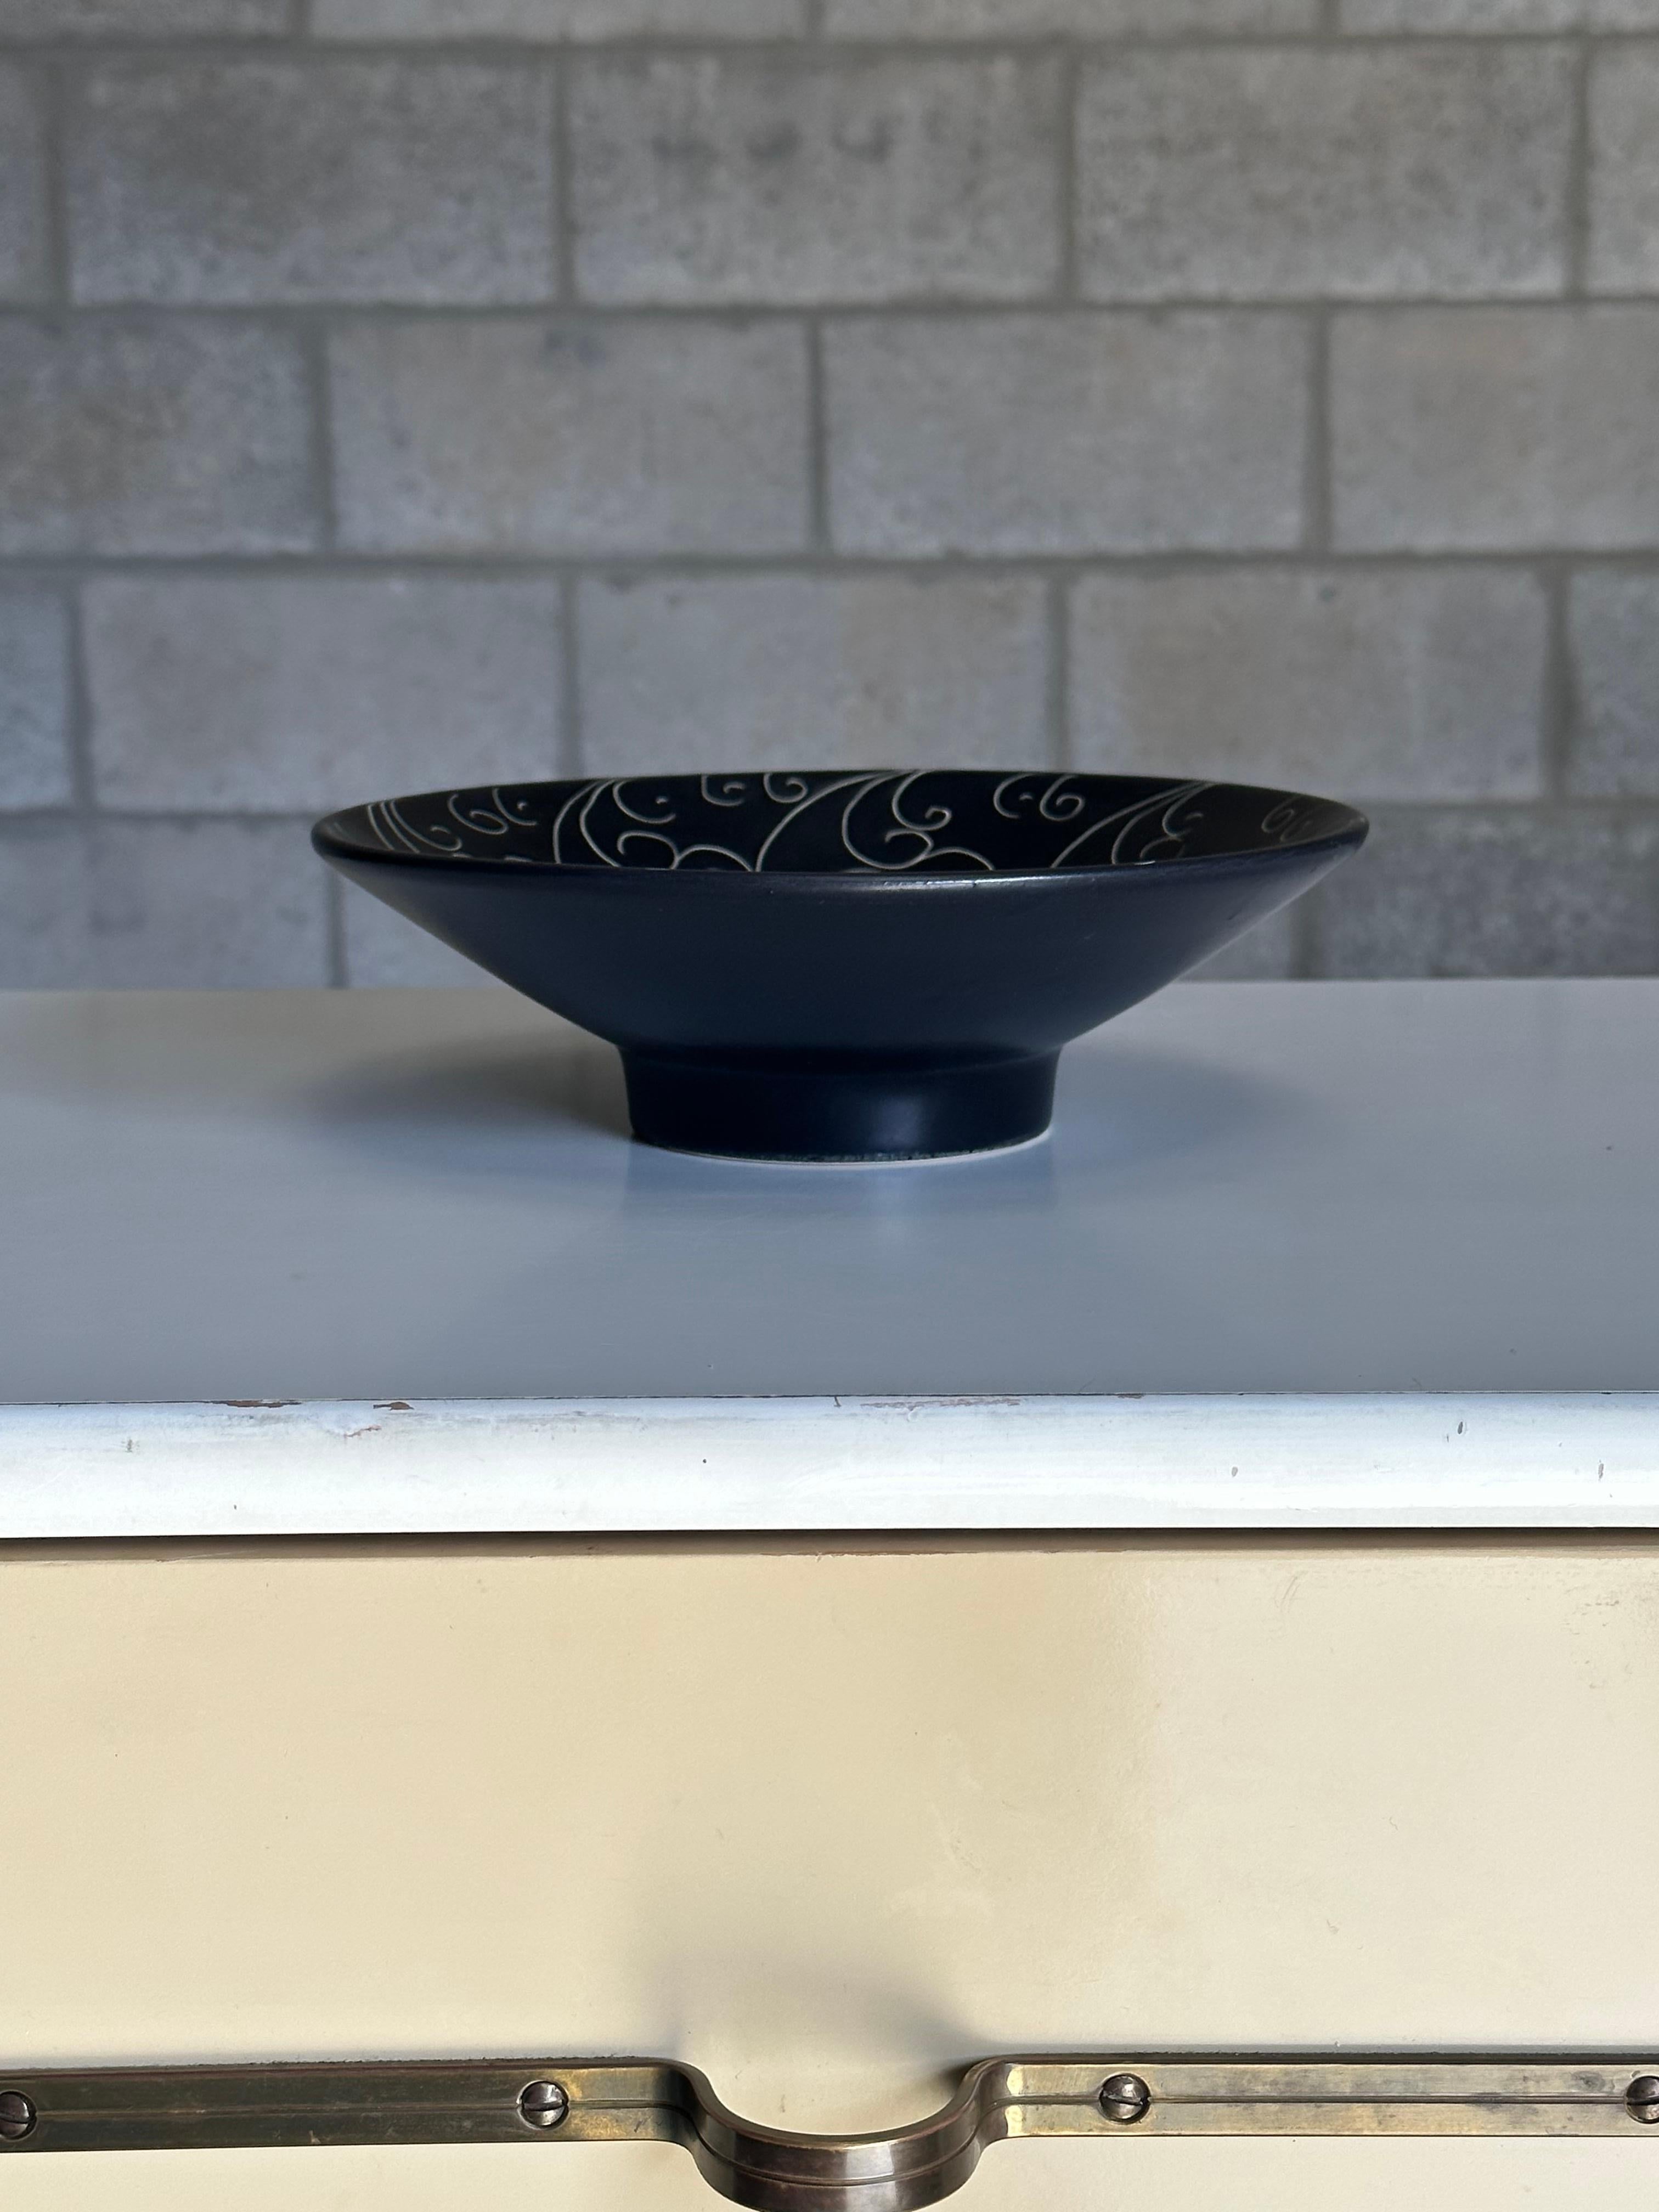 A Large decorative bowl produced by Gabriel Keramik of Sweden. Features a black glazed body with incised pattern detail. Great size and form. Would work well as a center piece bowl or fruit bowl. 